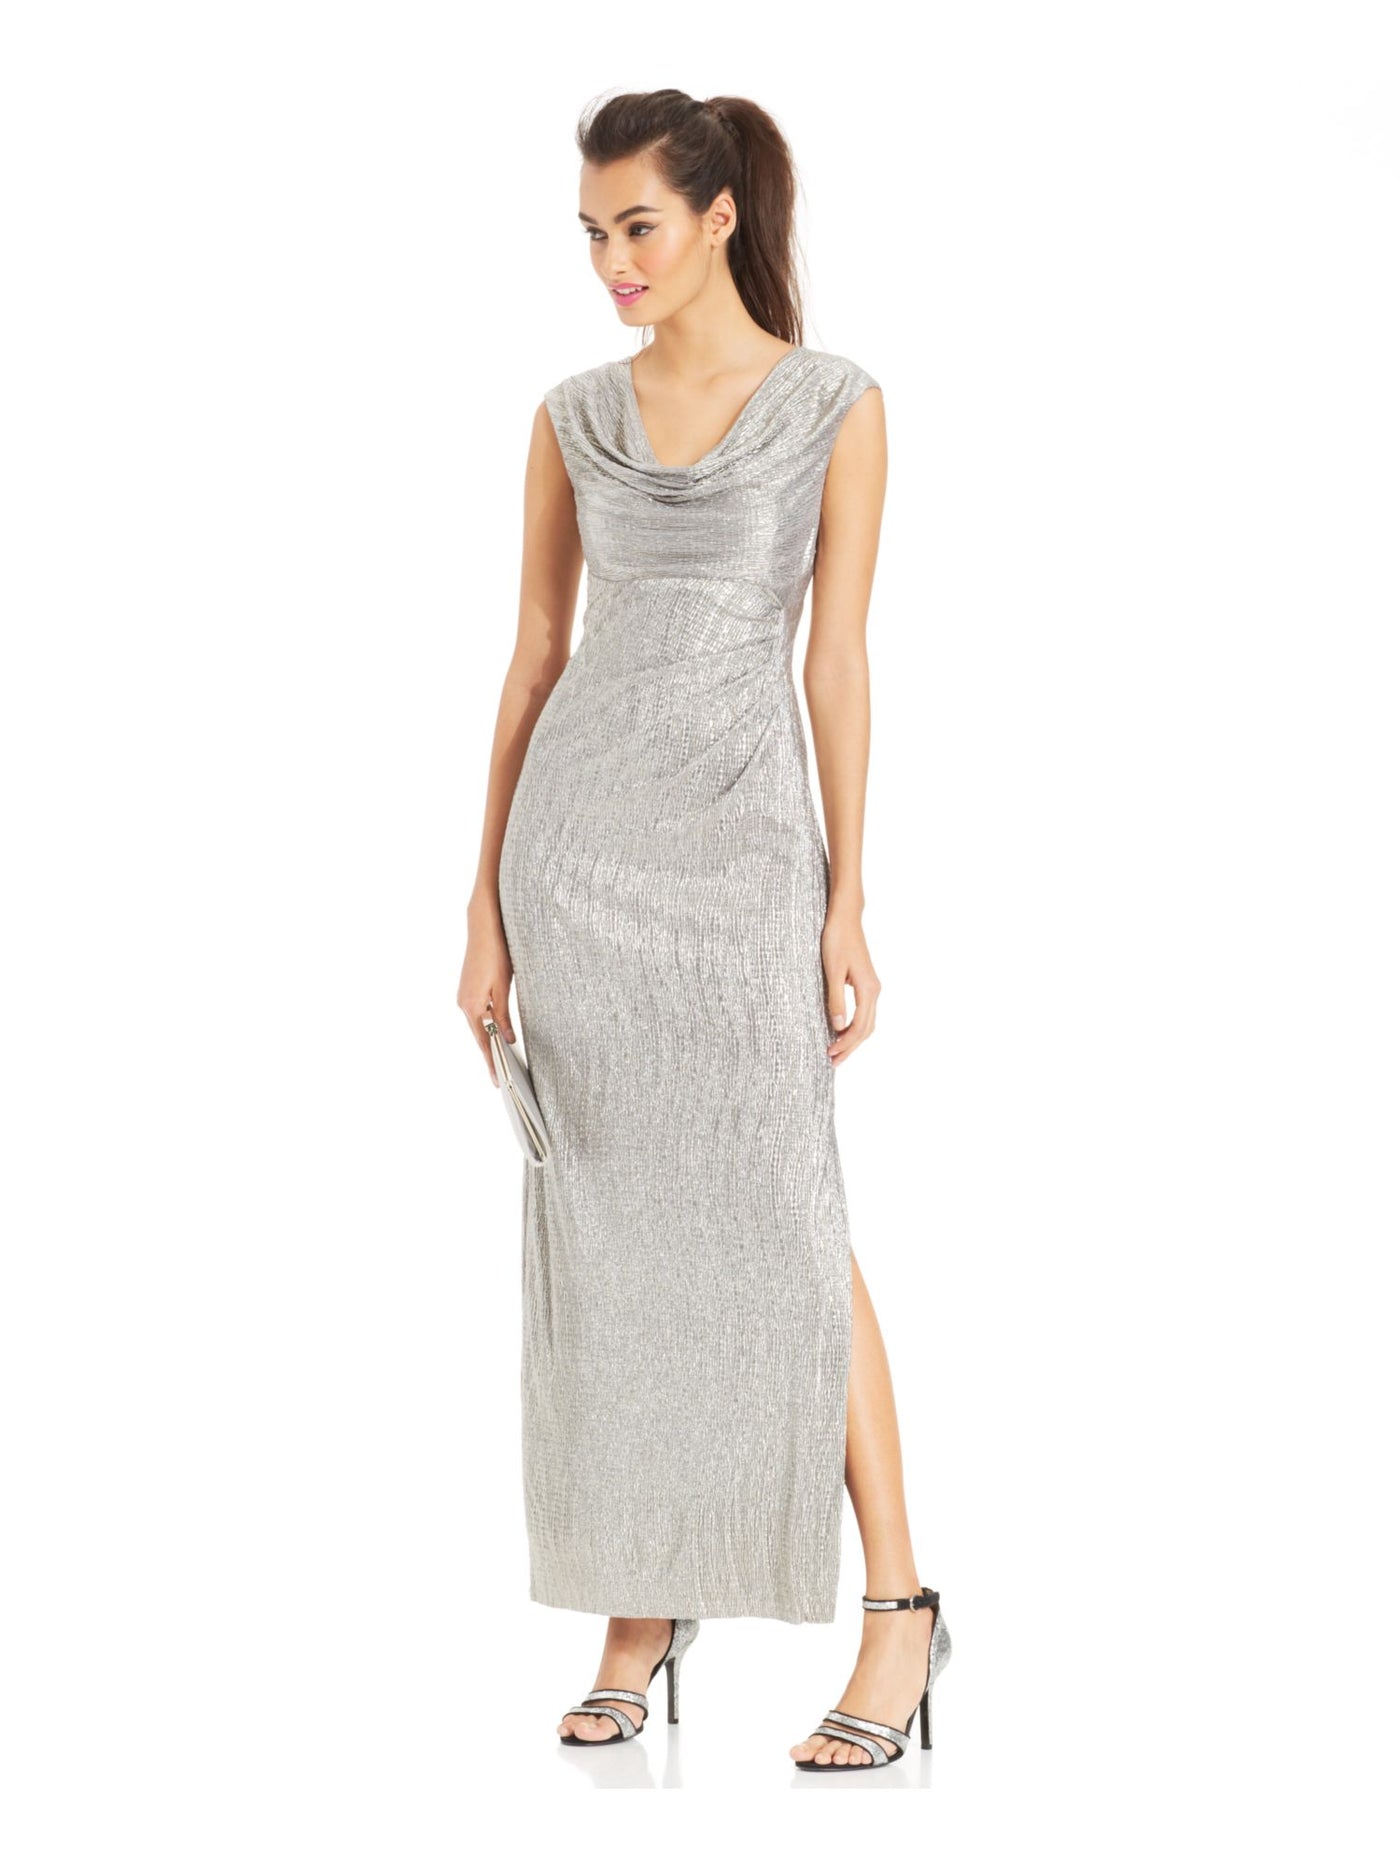 CONNECTED APPAREL Womens Silver Textured Slitted Metallic Gown Sleeveless Cowl Neck Maxi Evening Sheath Dress Petites 6P